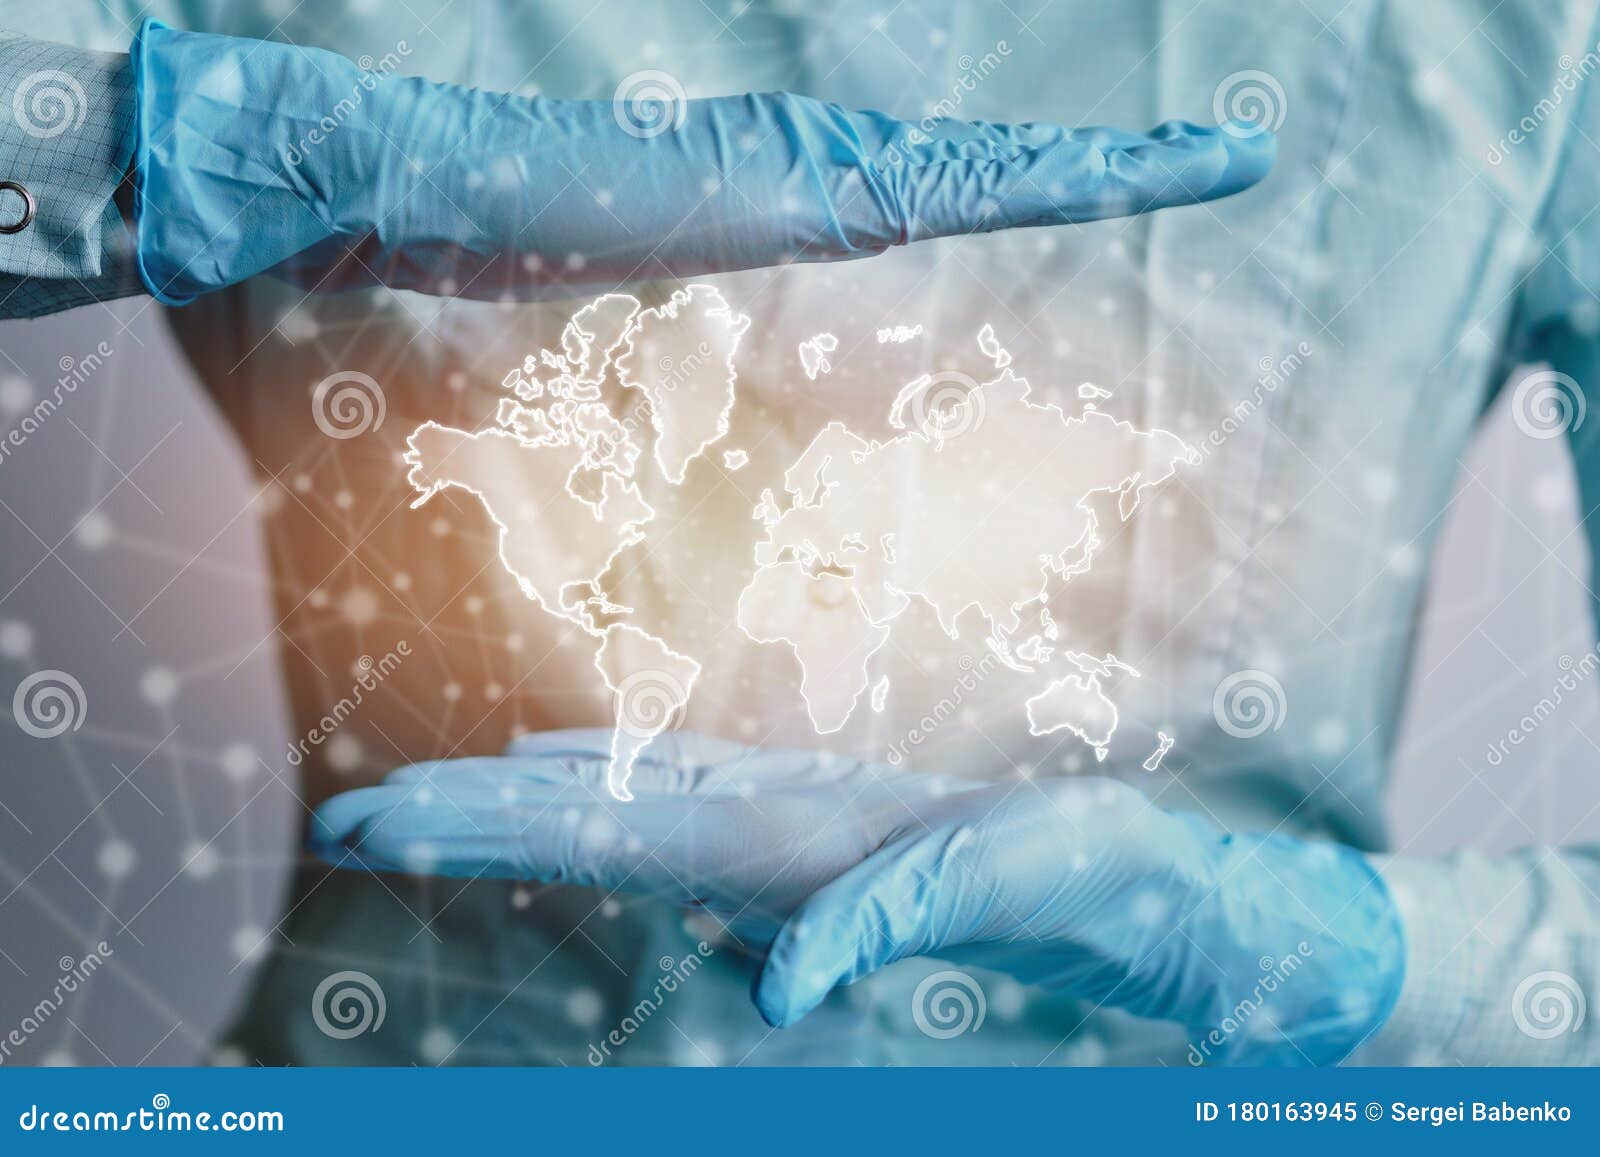 worldwide healthcare concept with doctor and map